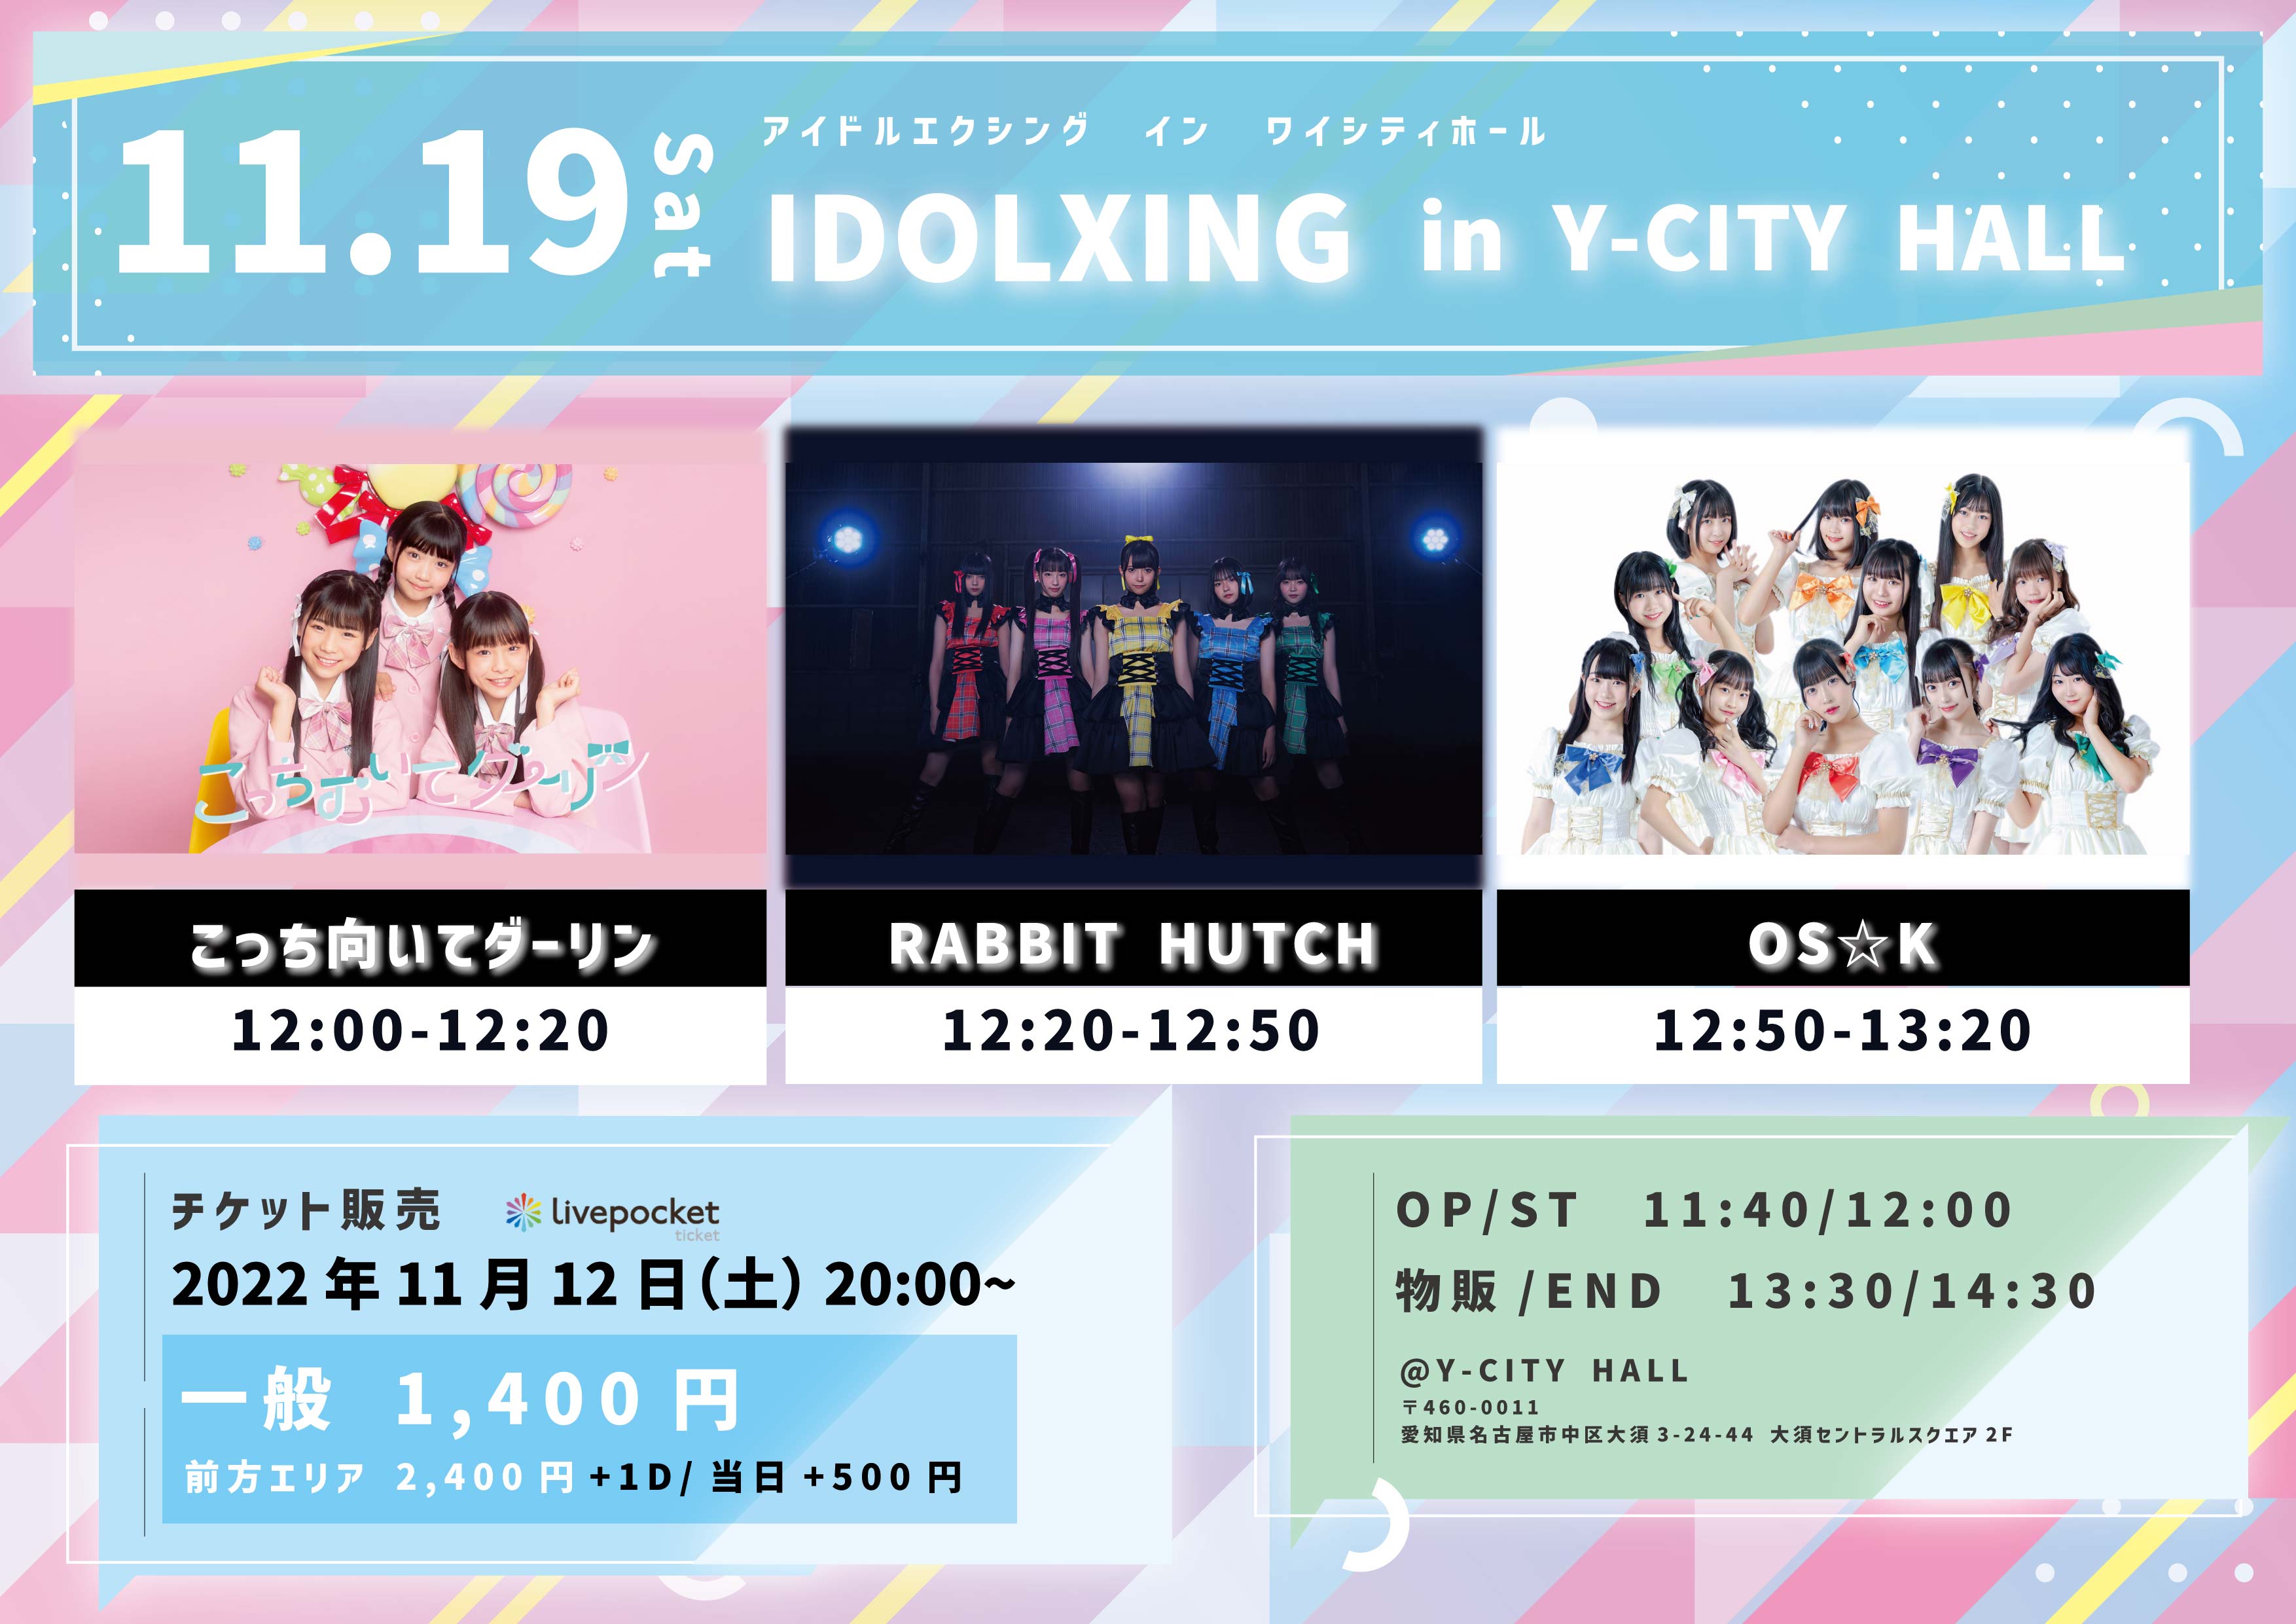 IDOLXING in Y-CITY HALL